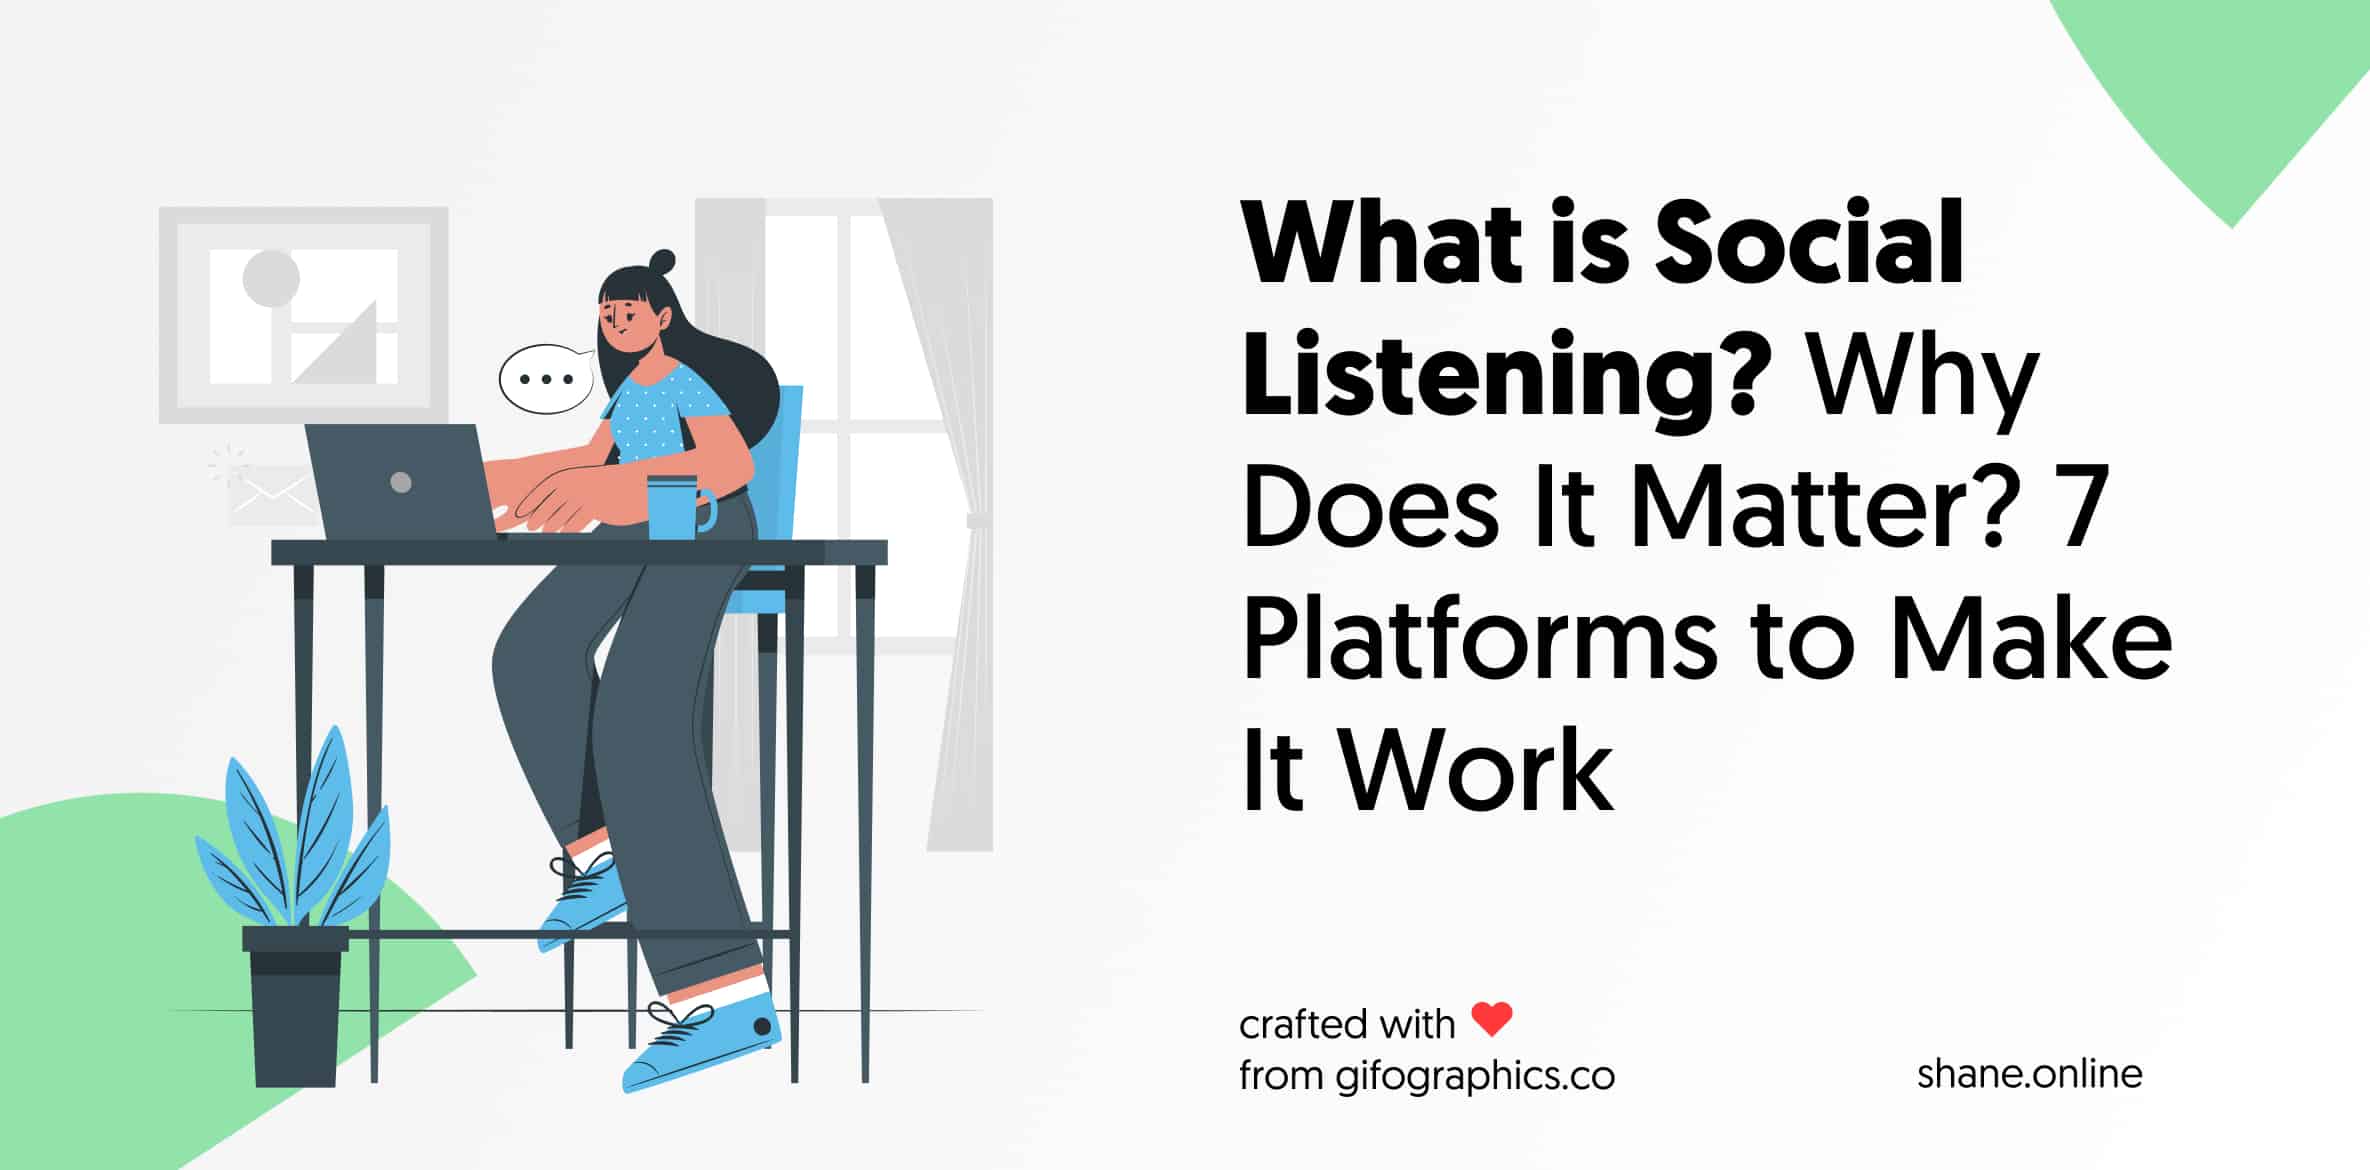 What is Social Listening? Why Does It Matter? 7 Platforms to Make It Work